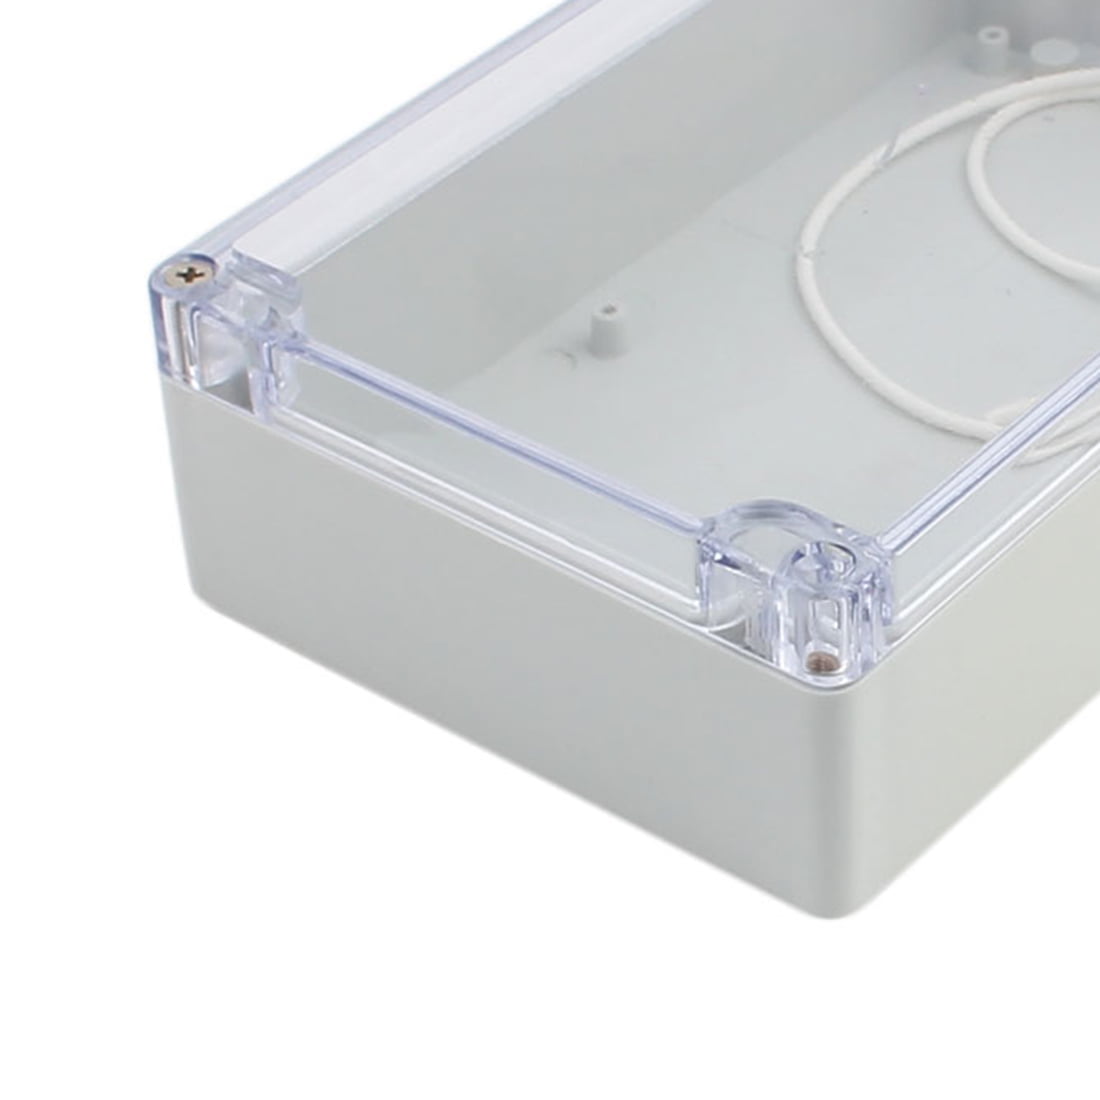 115x90x55 Waterproof Clear Cover Electronic Cable Project Box Enclosure CaseMFS 